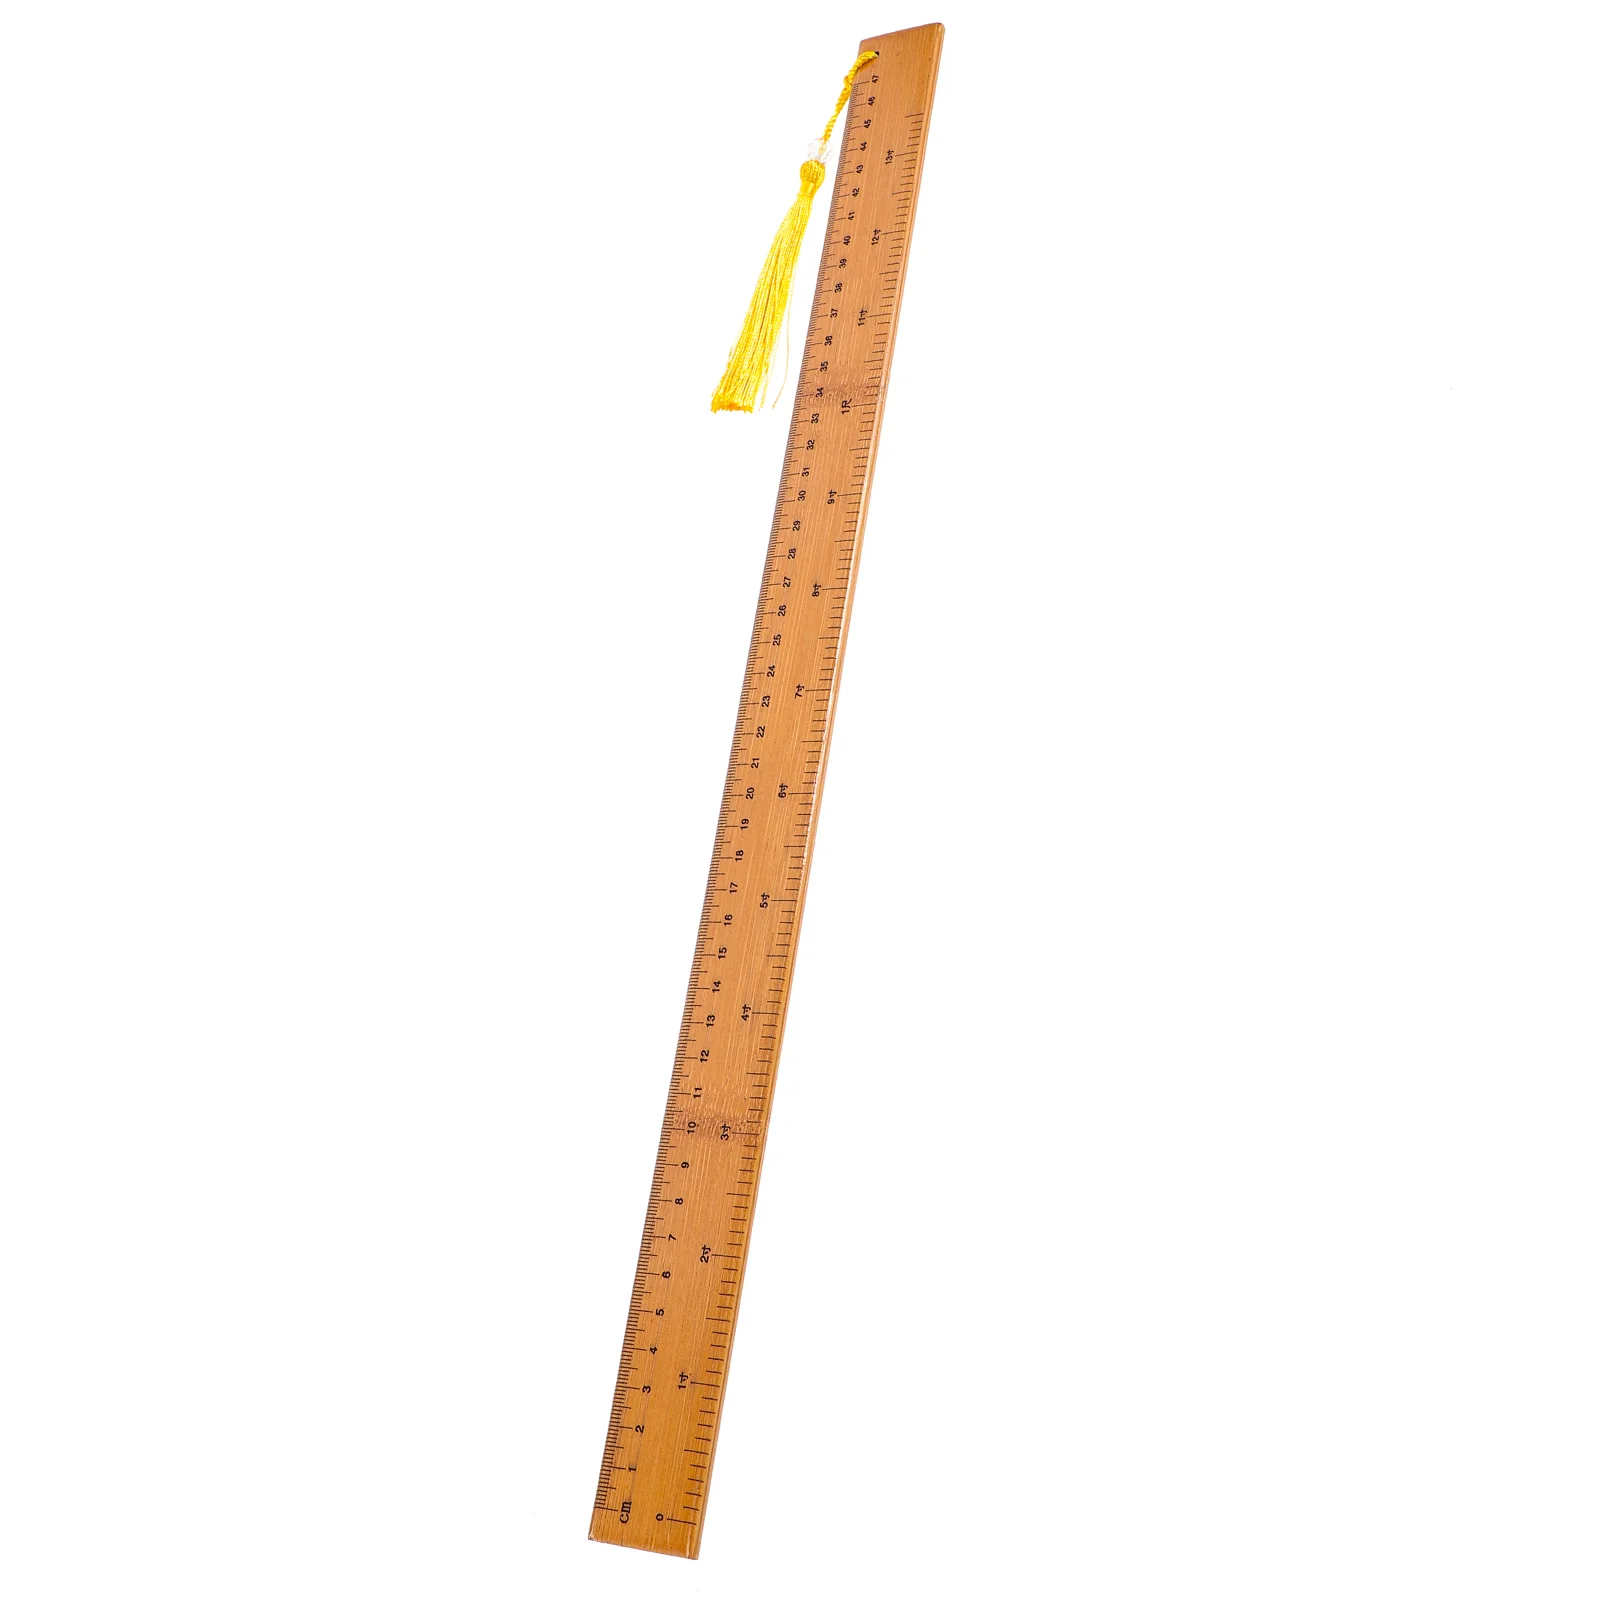 Household Straight Ruler Kids Ruler Measuring Bamboo Ruler Precise Student Ruler School Accessory Kids School Teaching Home bevel gauge mitre tool 2 in 1 mitre measuring cutting tool for pipeline installation home improvement sawing angle for baseboard